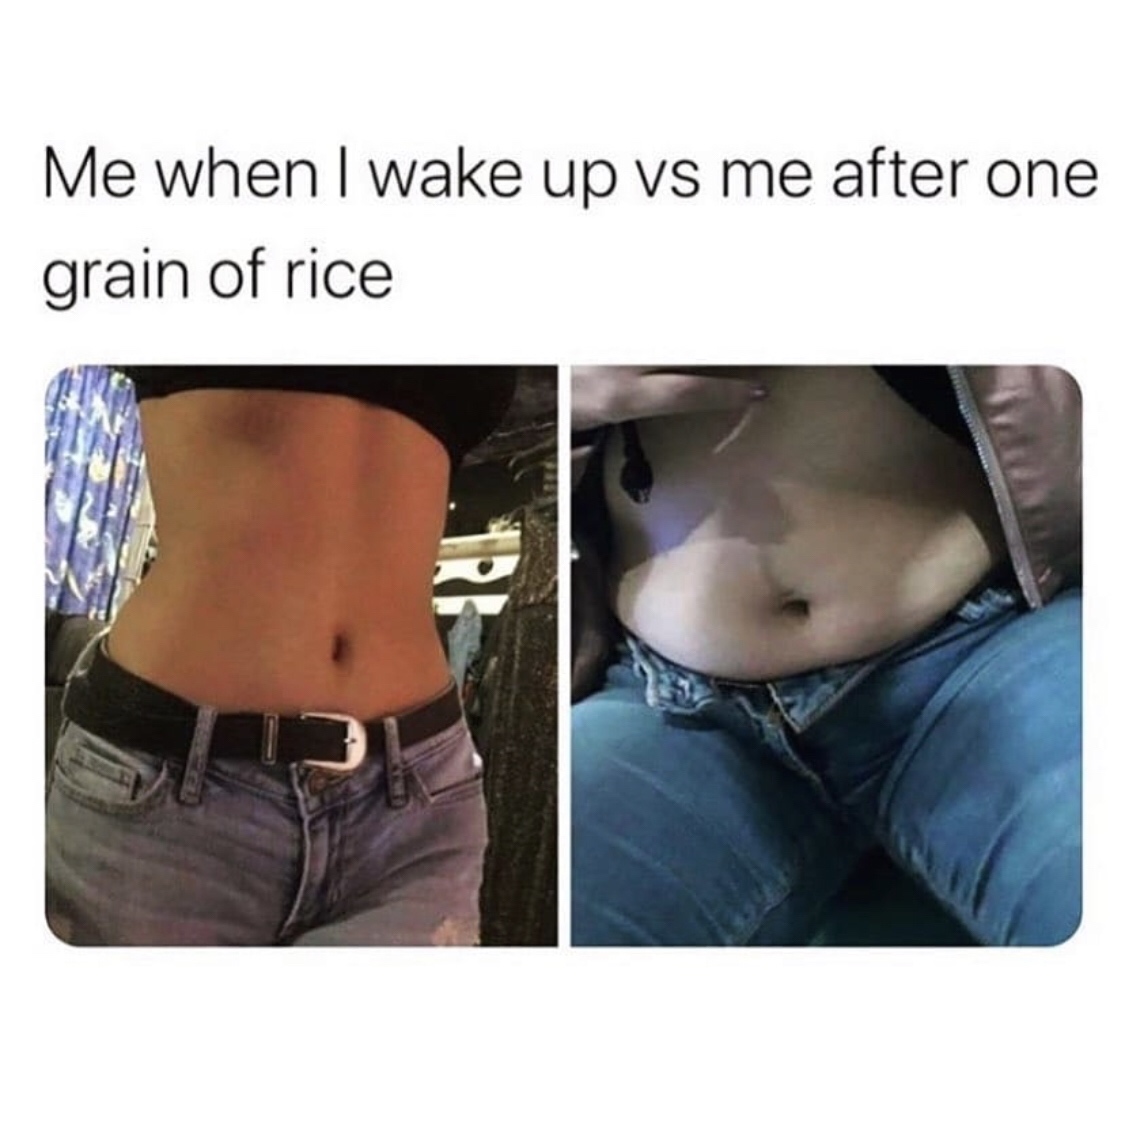 abdomen - Me when I wake up vs me after one grain of rice